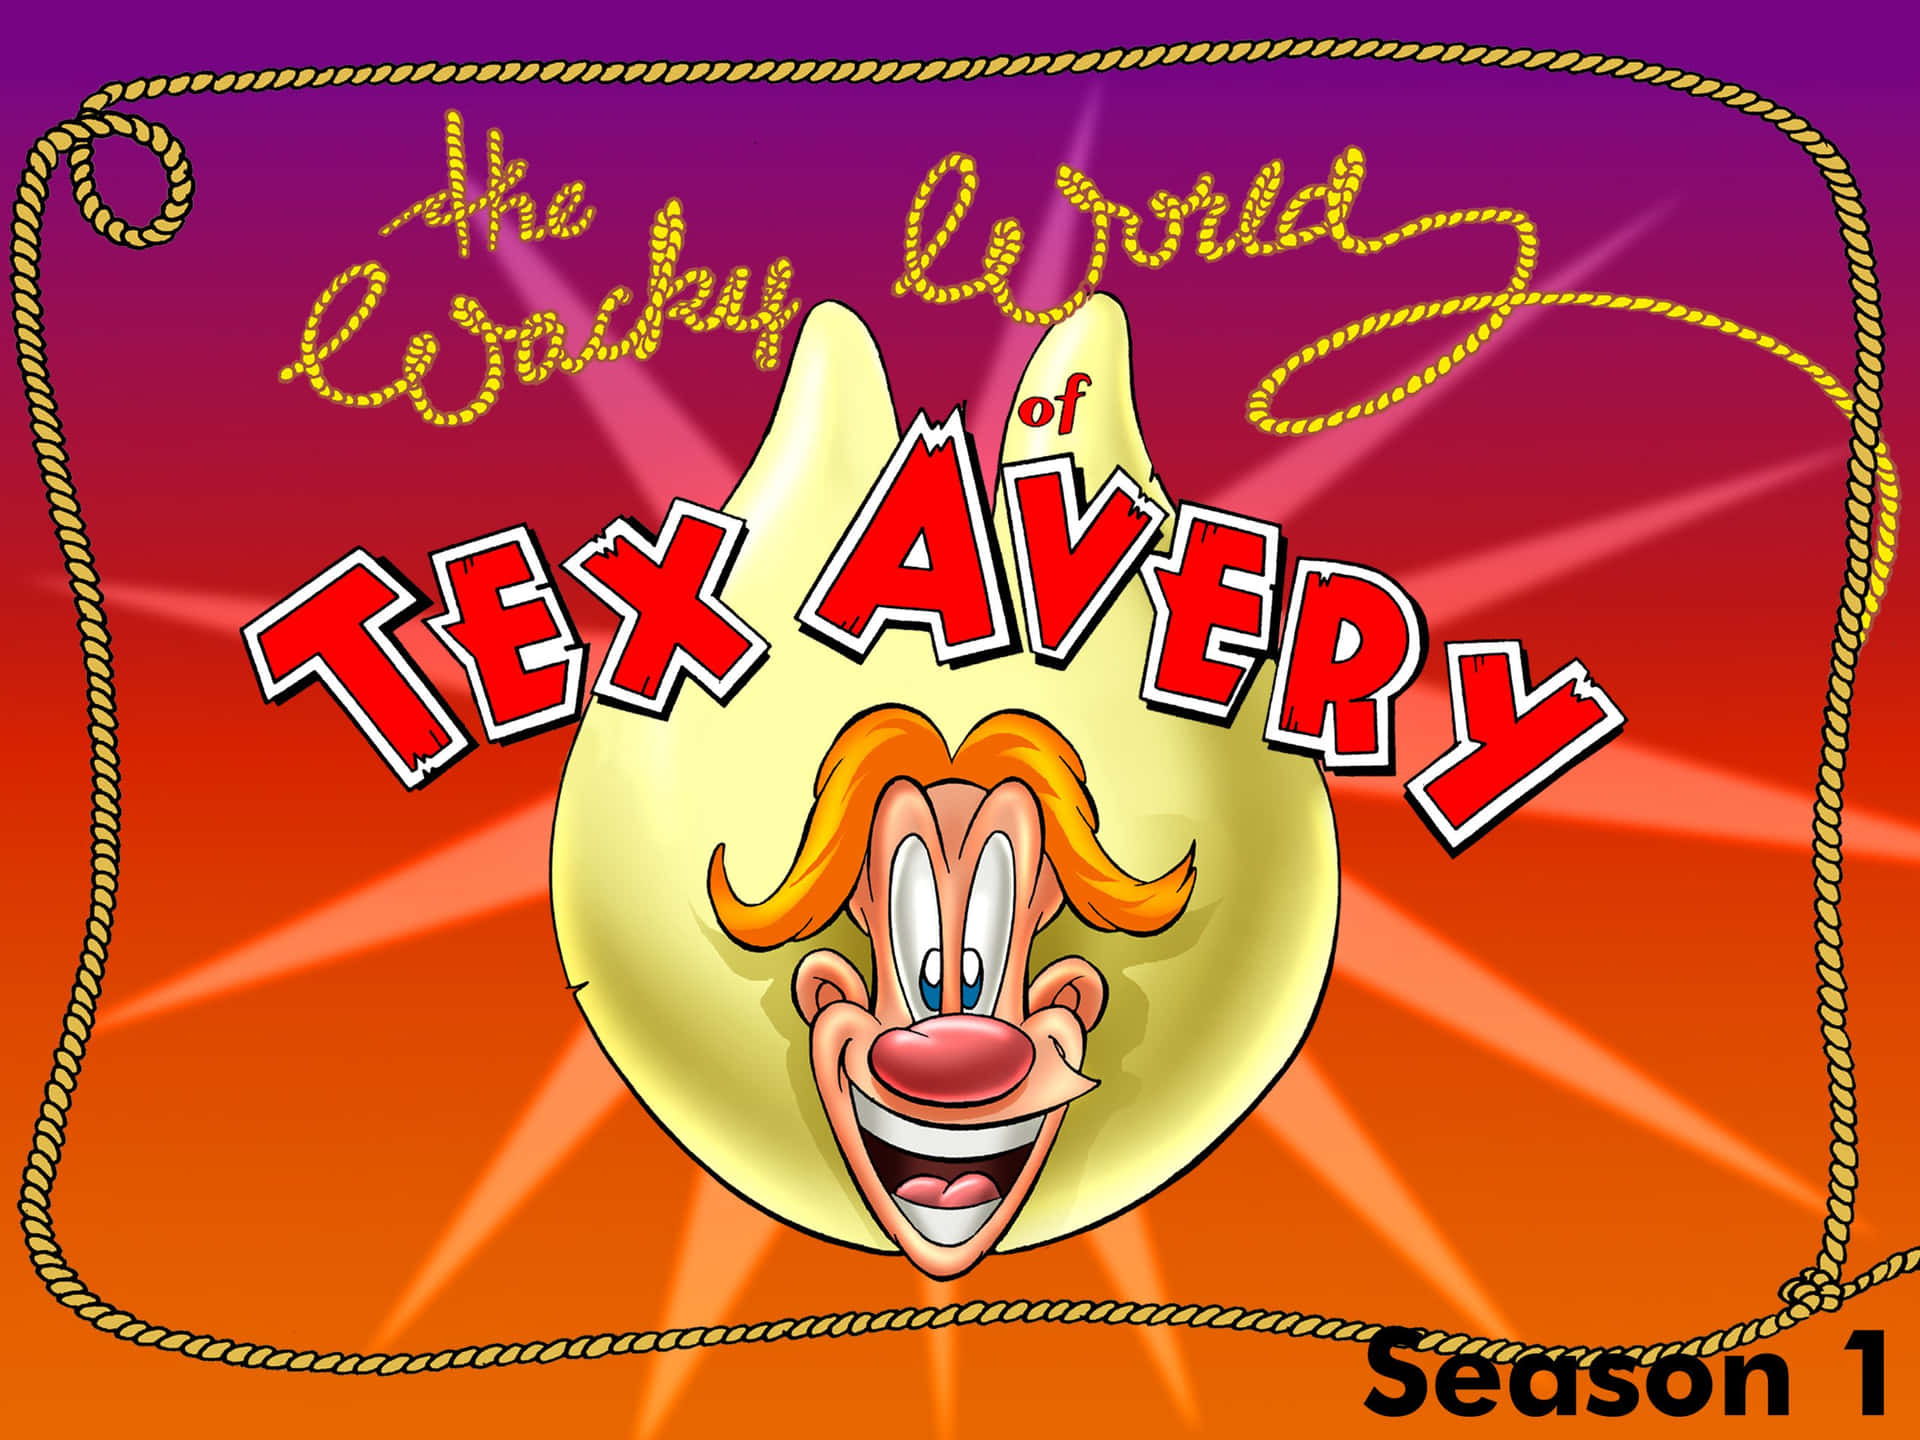 The Wacky World of Tex Avery and friends in an adventure-filled episode Wallpaper